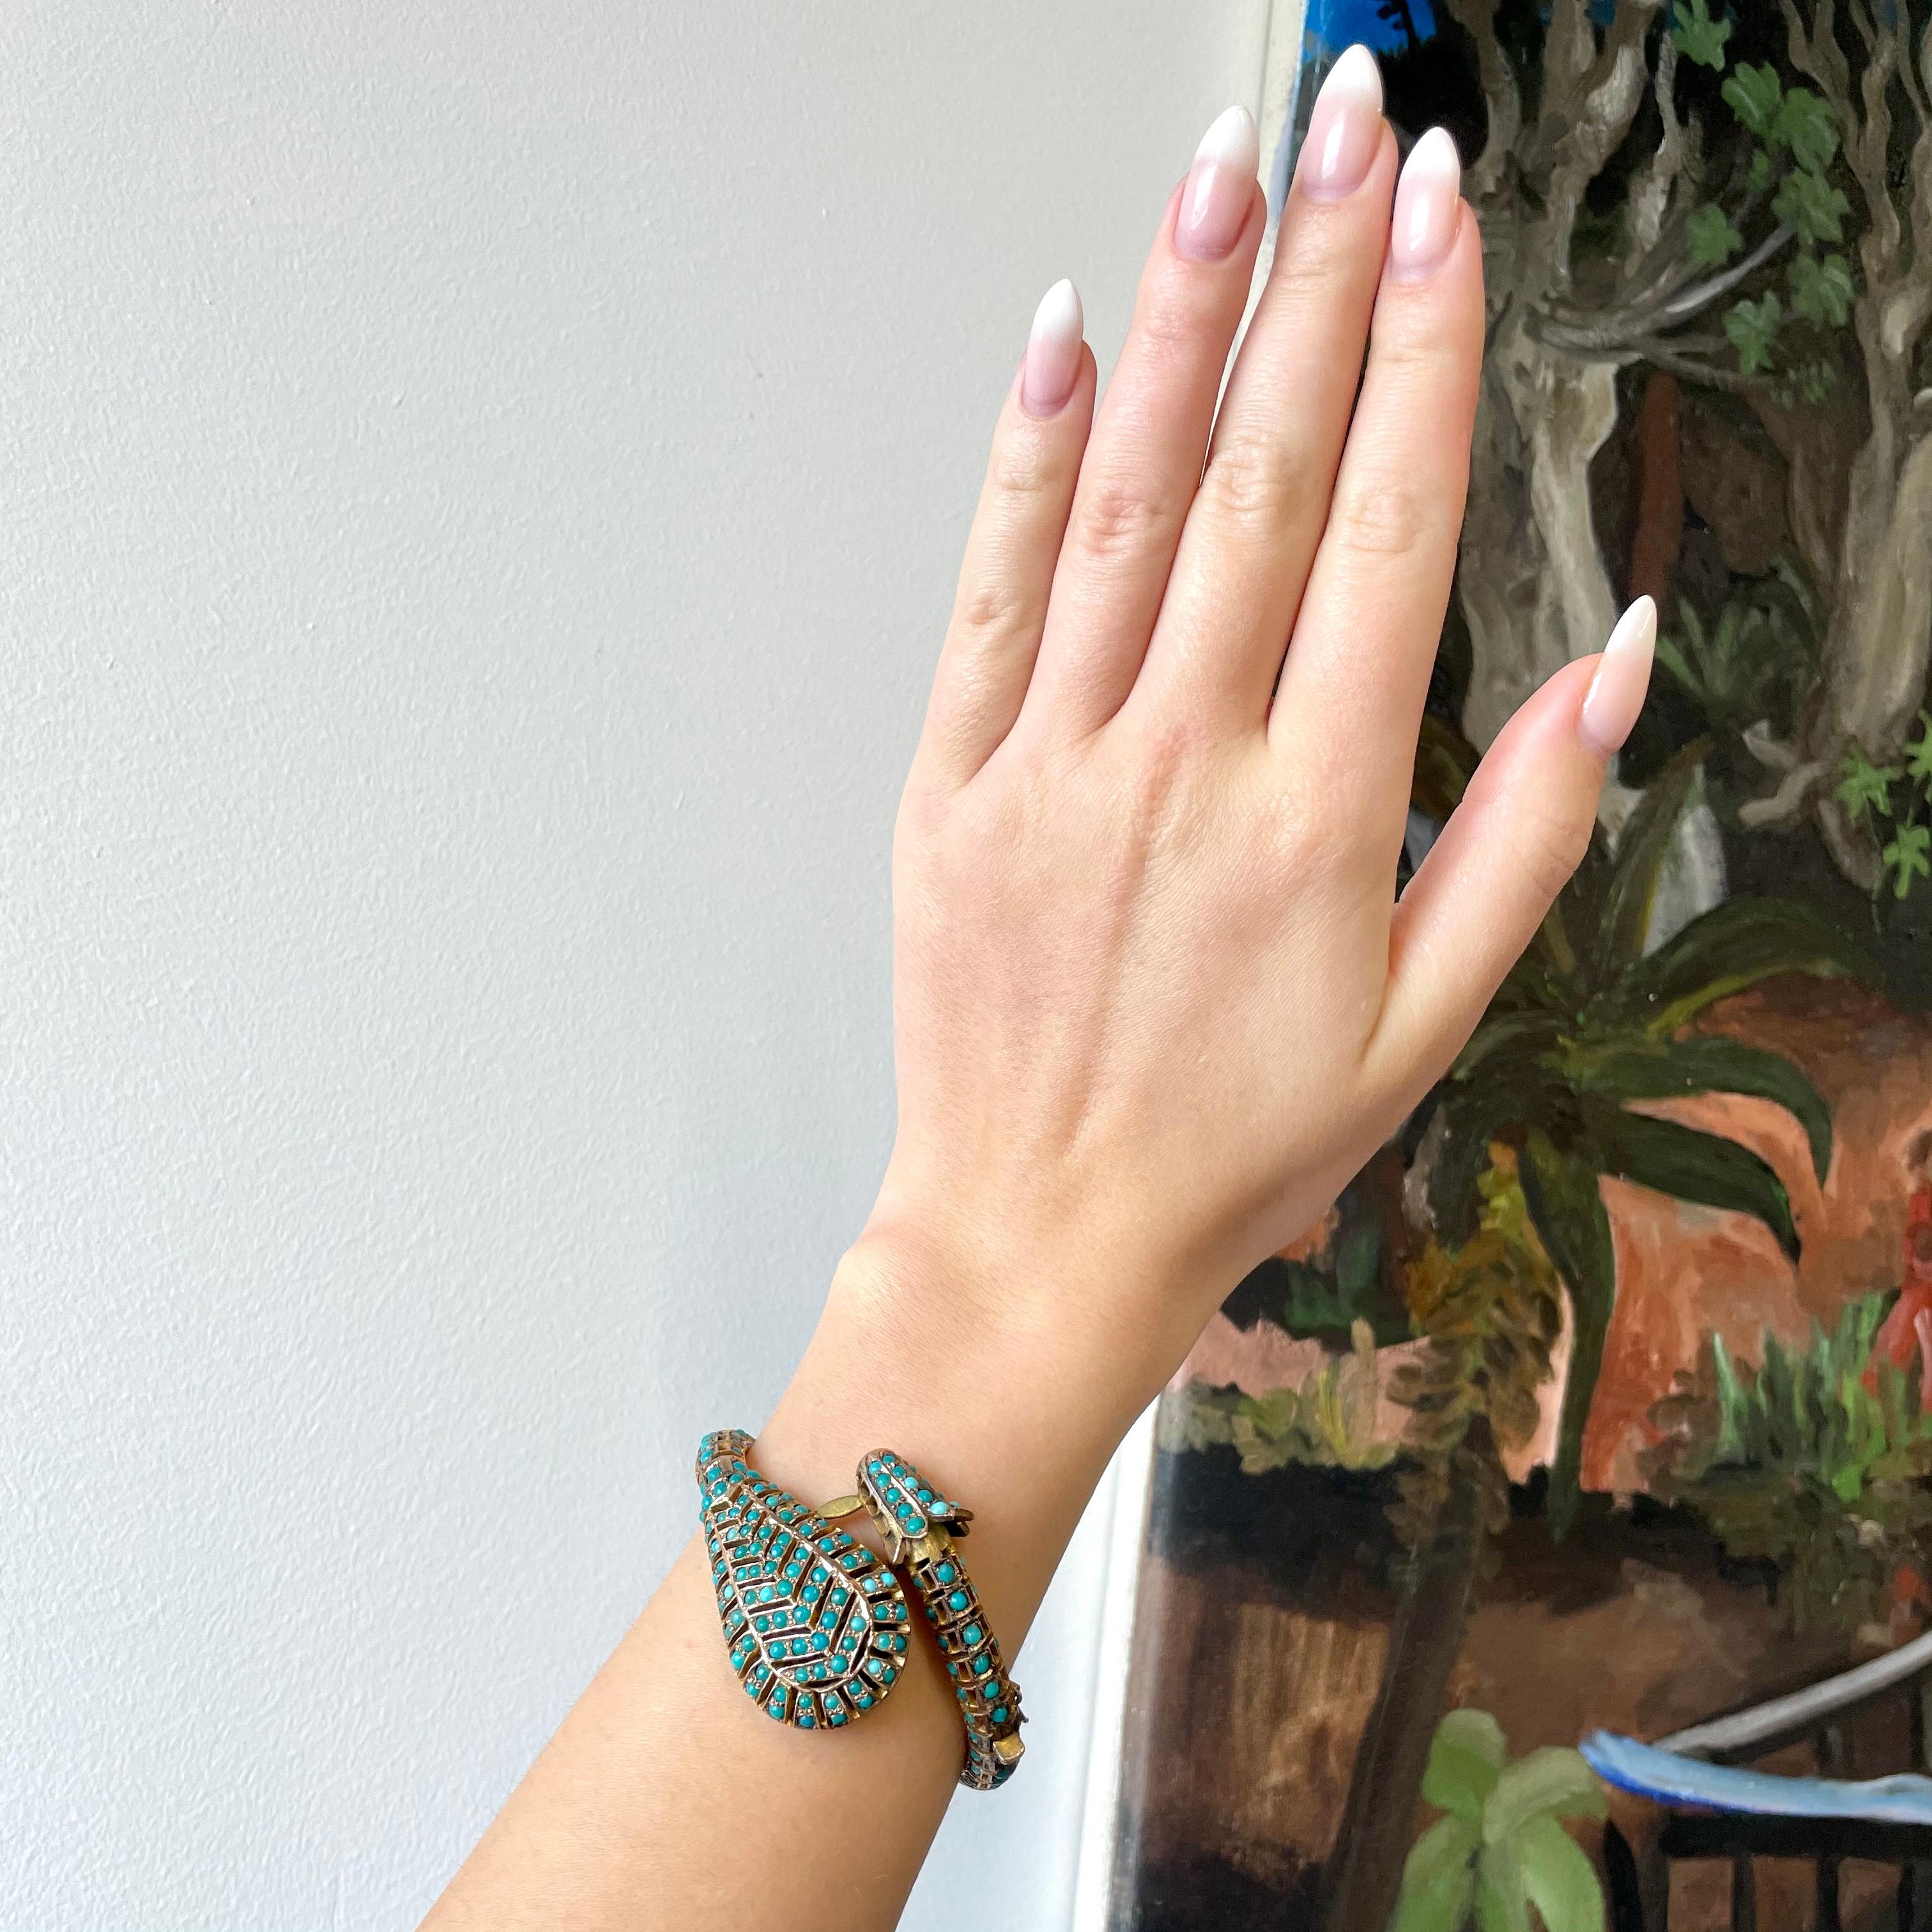 Have a snake on your wrist to avoid having one in your life. Serpent inspired jewelry has been a non-negotiable trend for centuries. If you don't have a snake jewel yet, this is your chance to become a lucky owner of this talisman. This bangle is